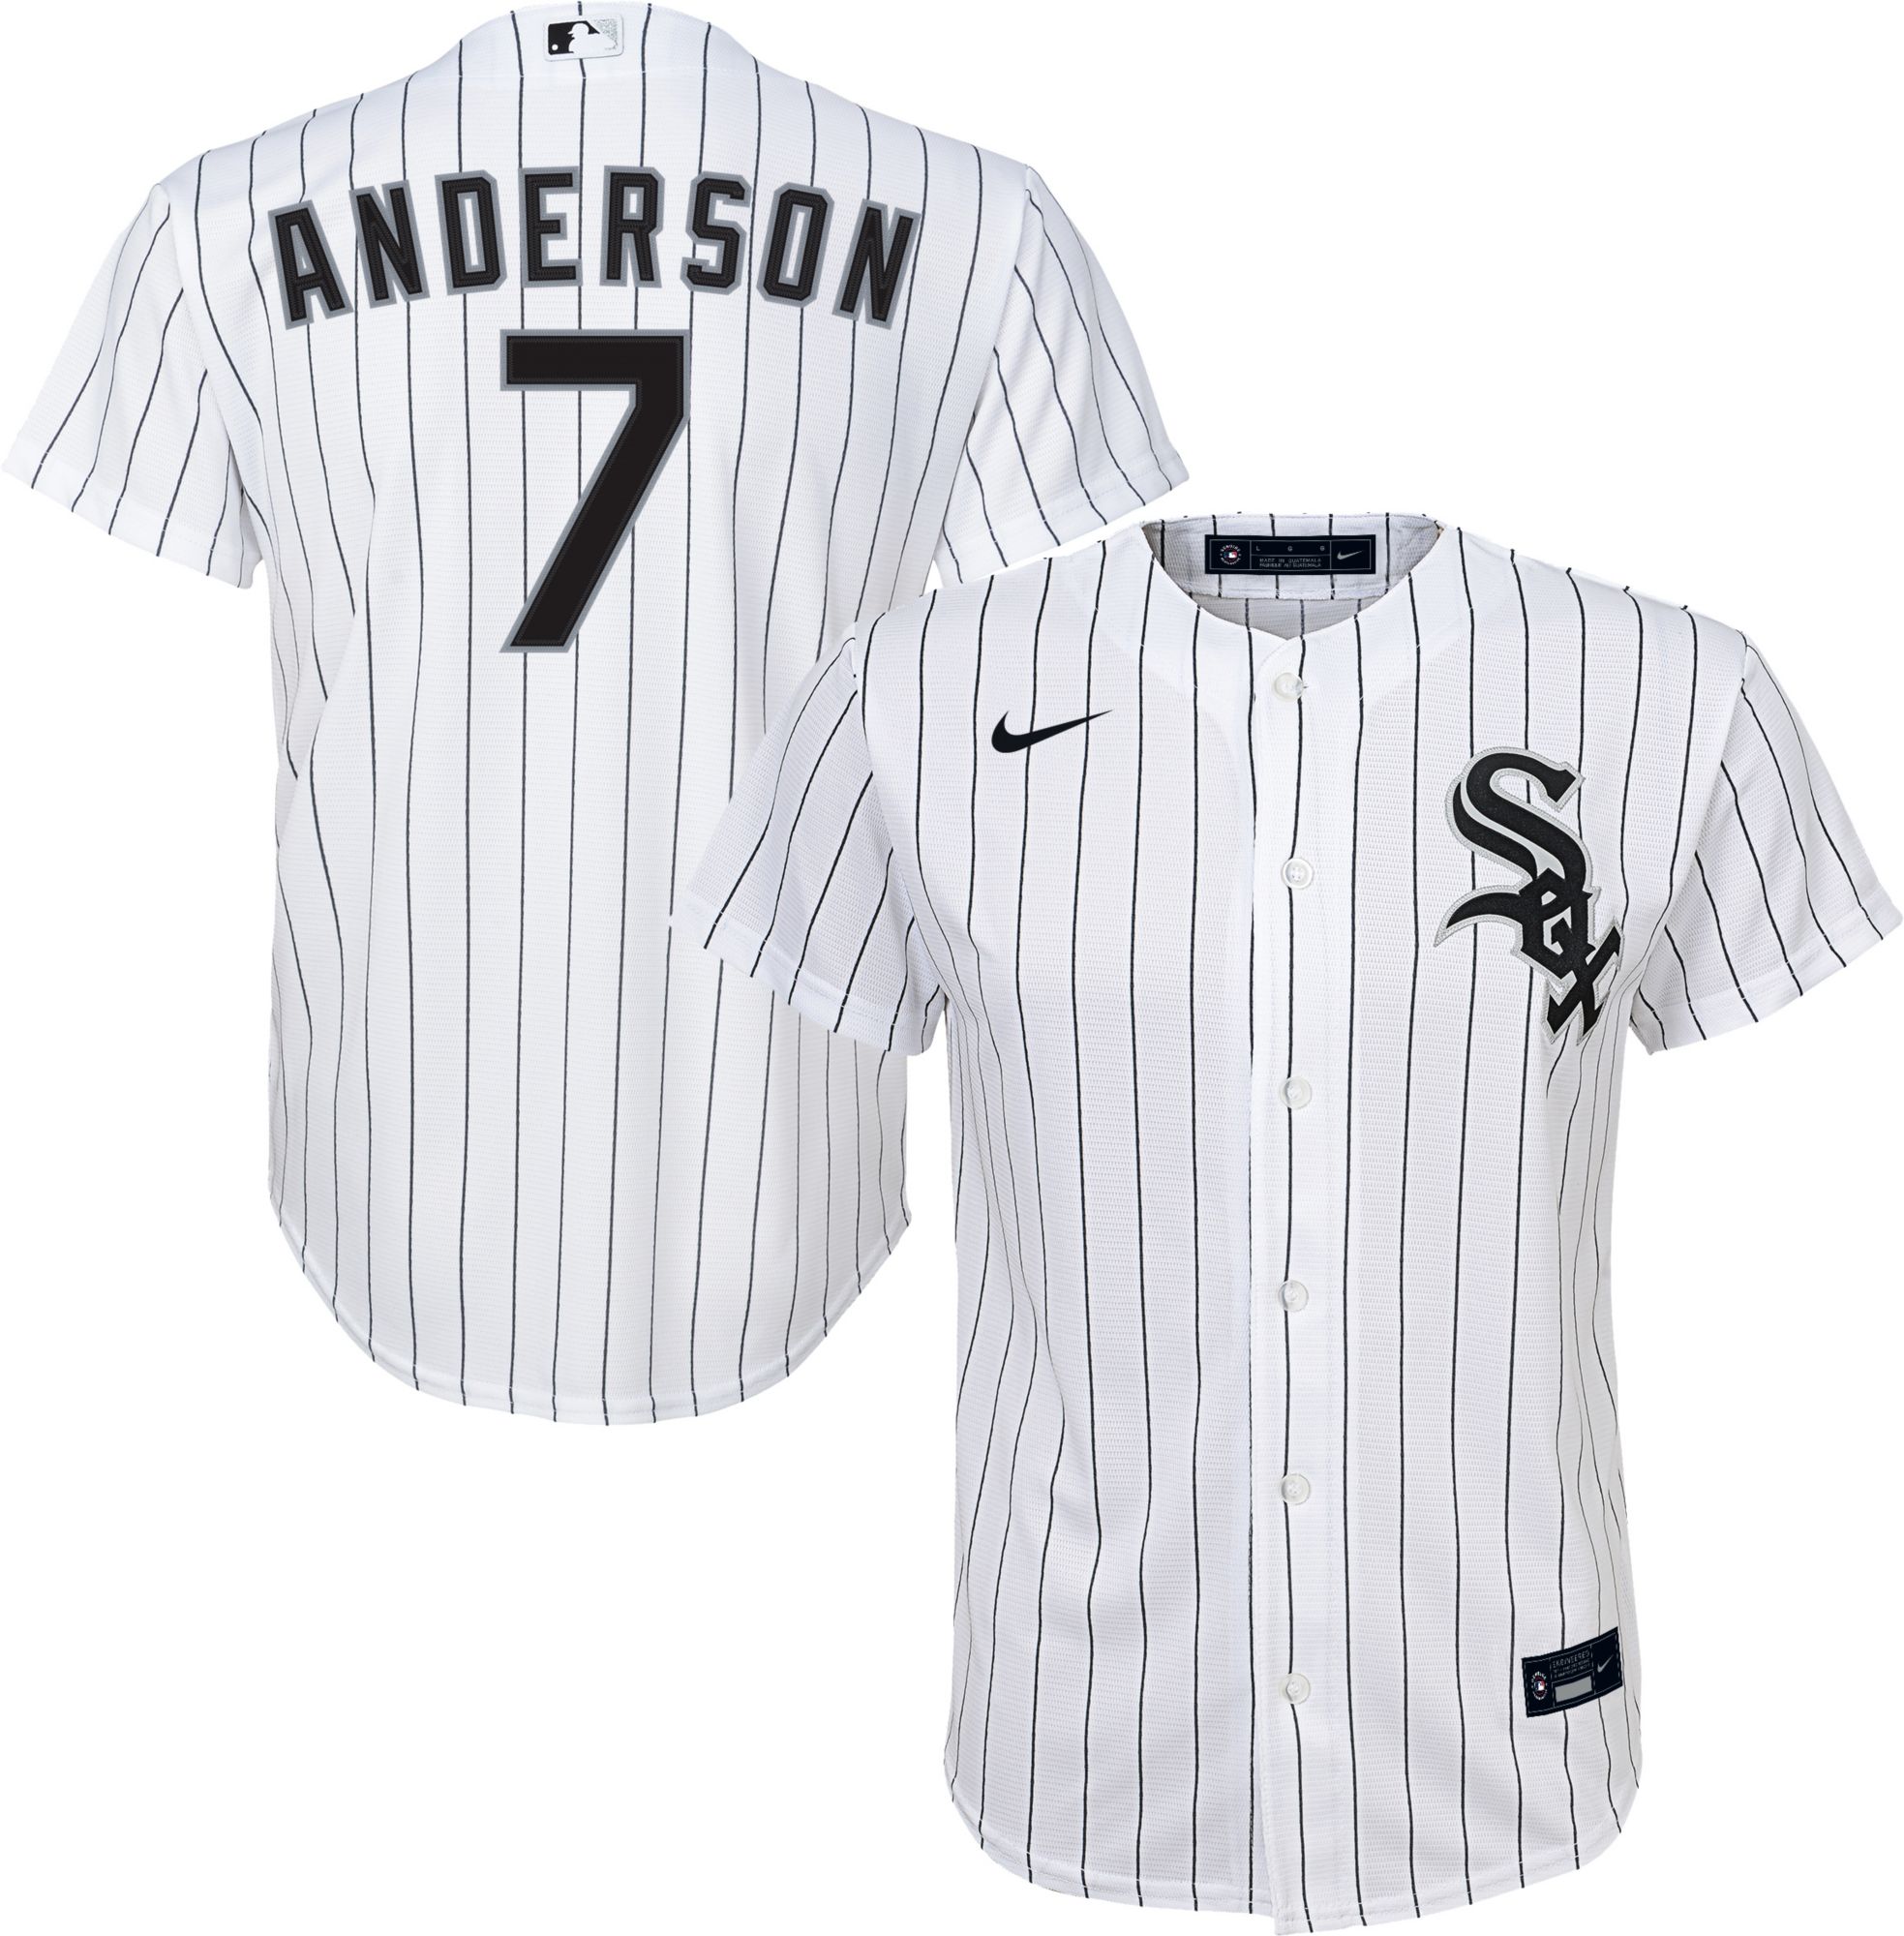 Dick Anderson jersey